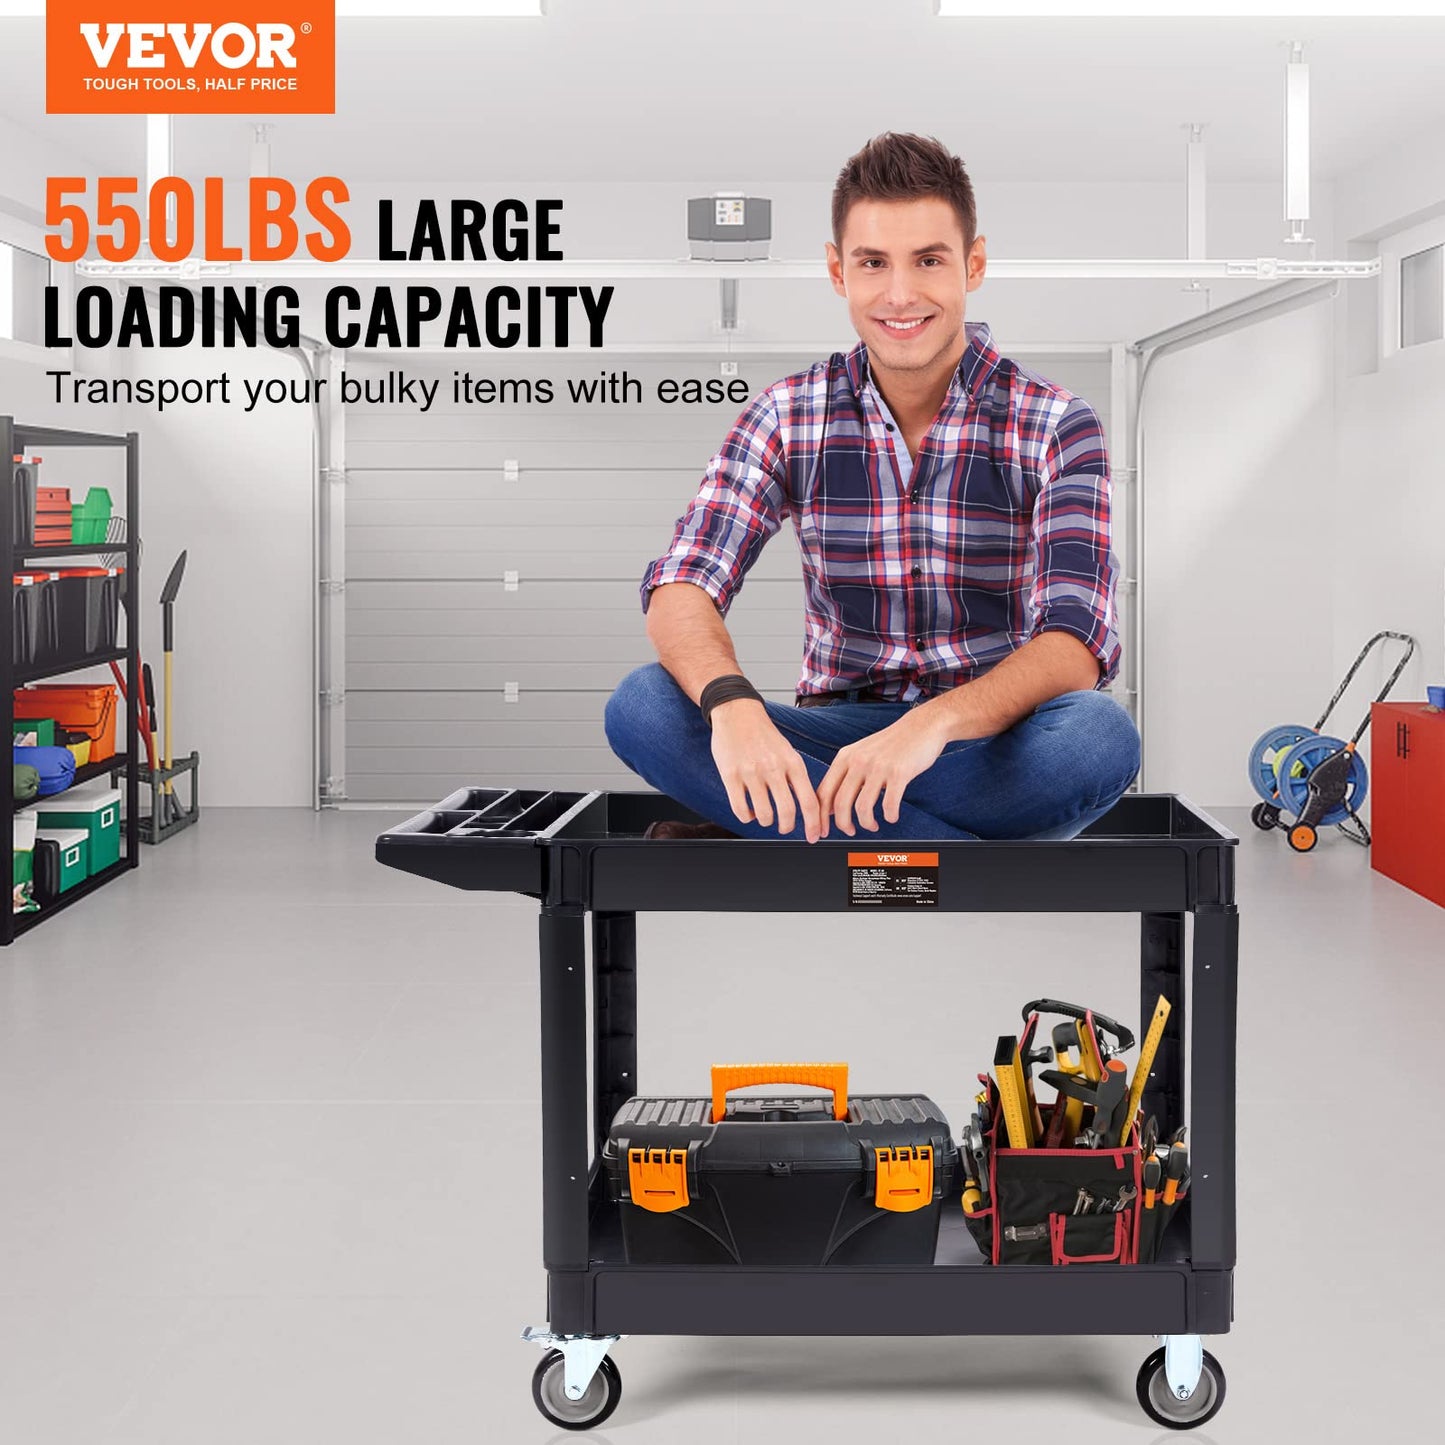 VEVOR Utility Service Cart, 2 Shelf 550LBS Heavy Duty Plastic Rolling Utility Cart with 360° Swivel Wheels (2 with Brakes), Large Lipped Shelf,